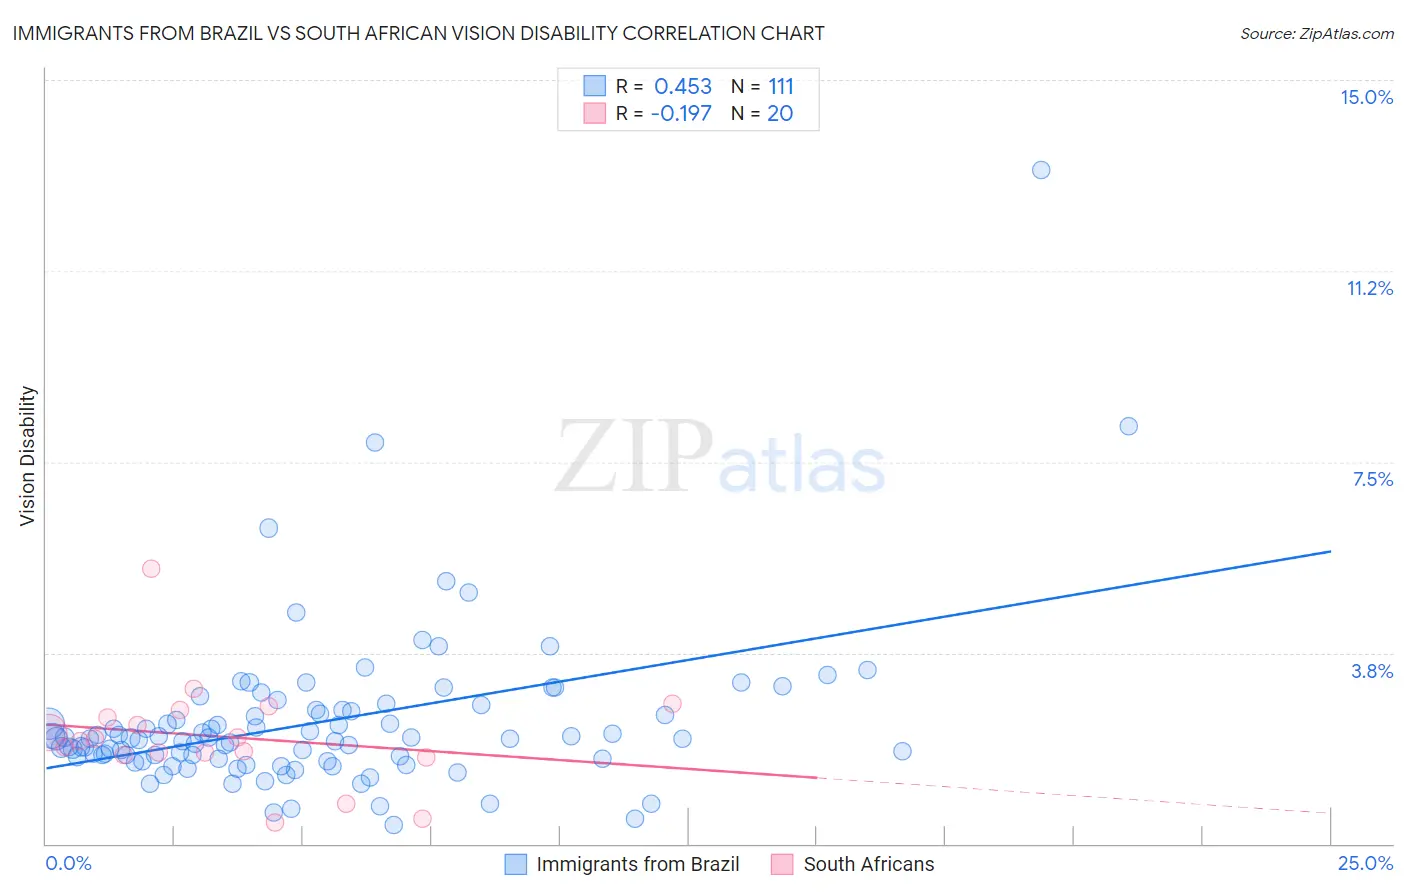 Immigrants from Brazil vs South African Vision Disability